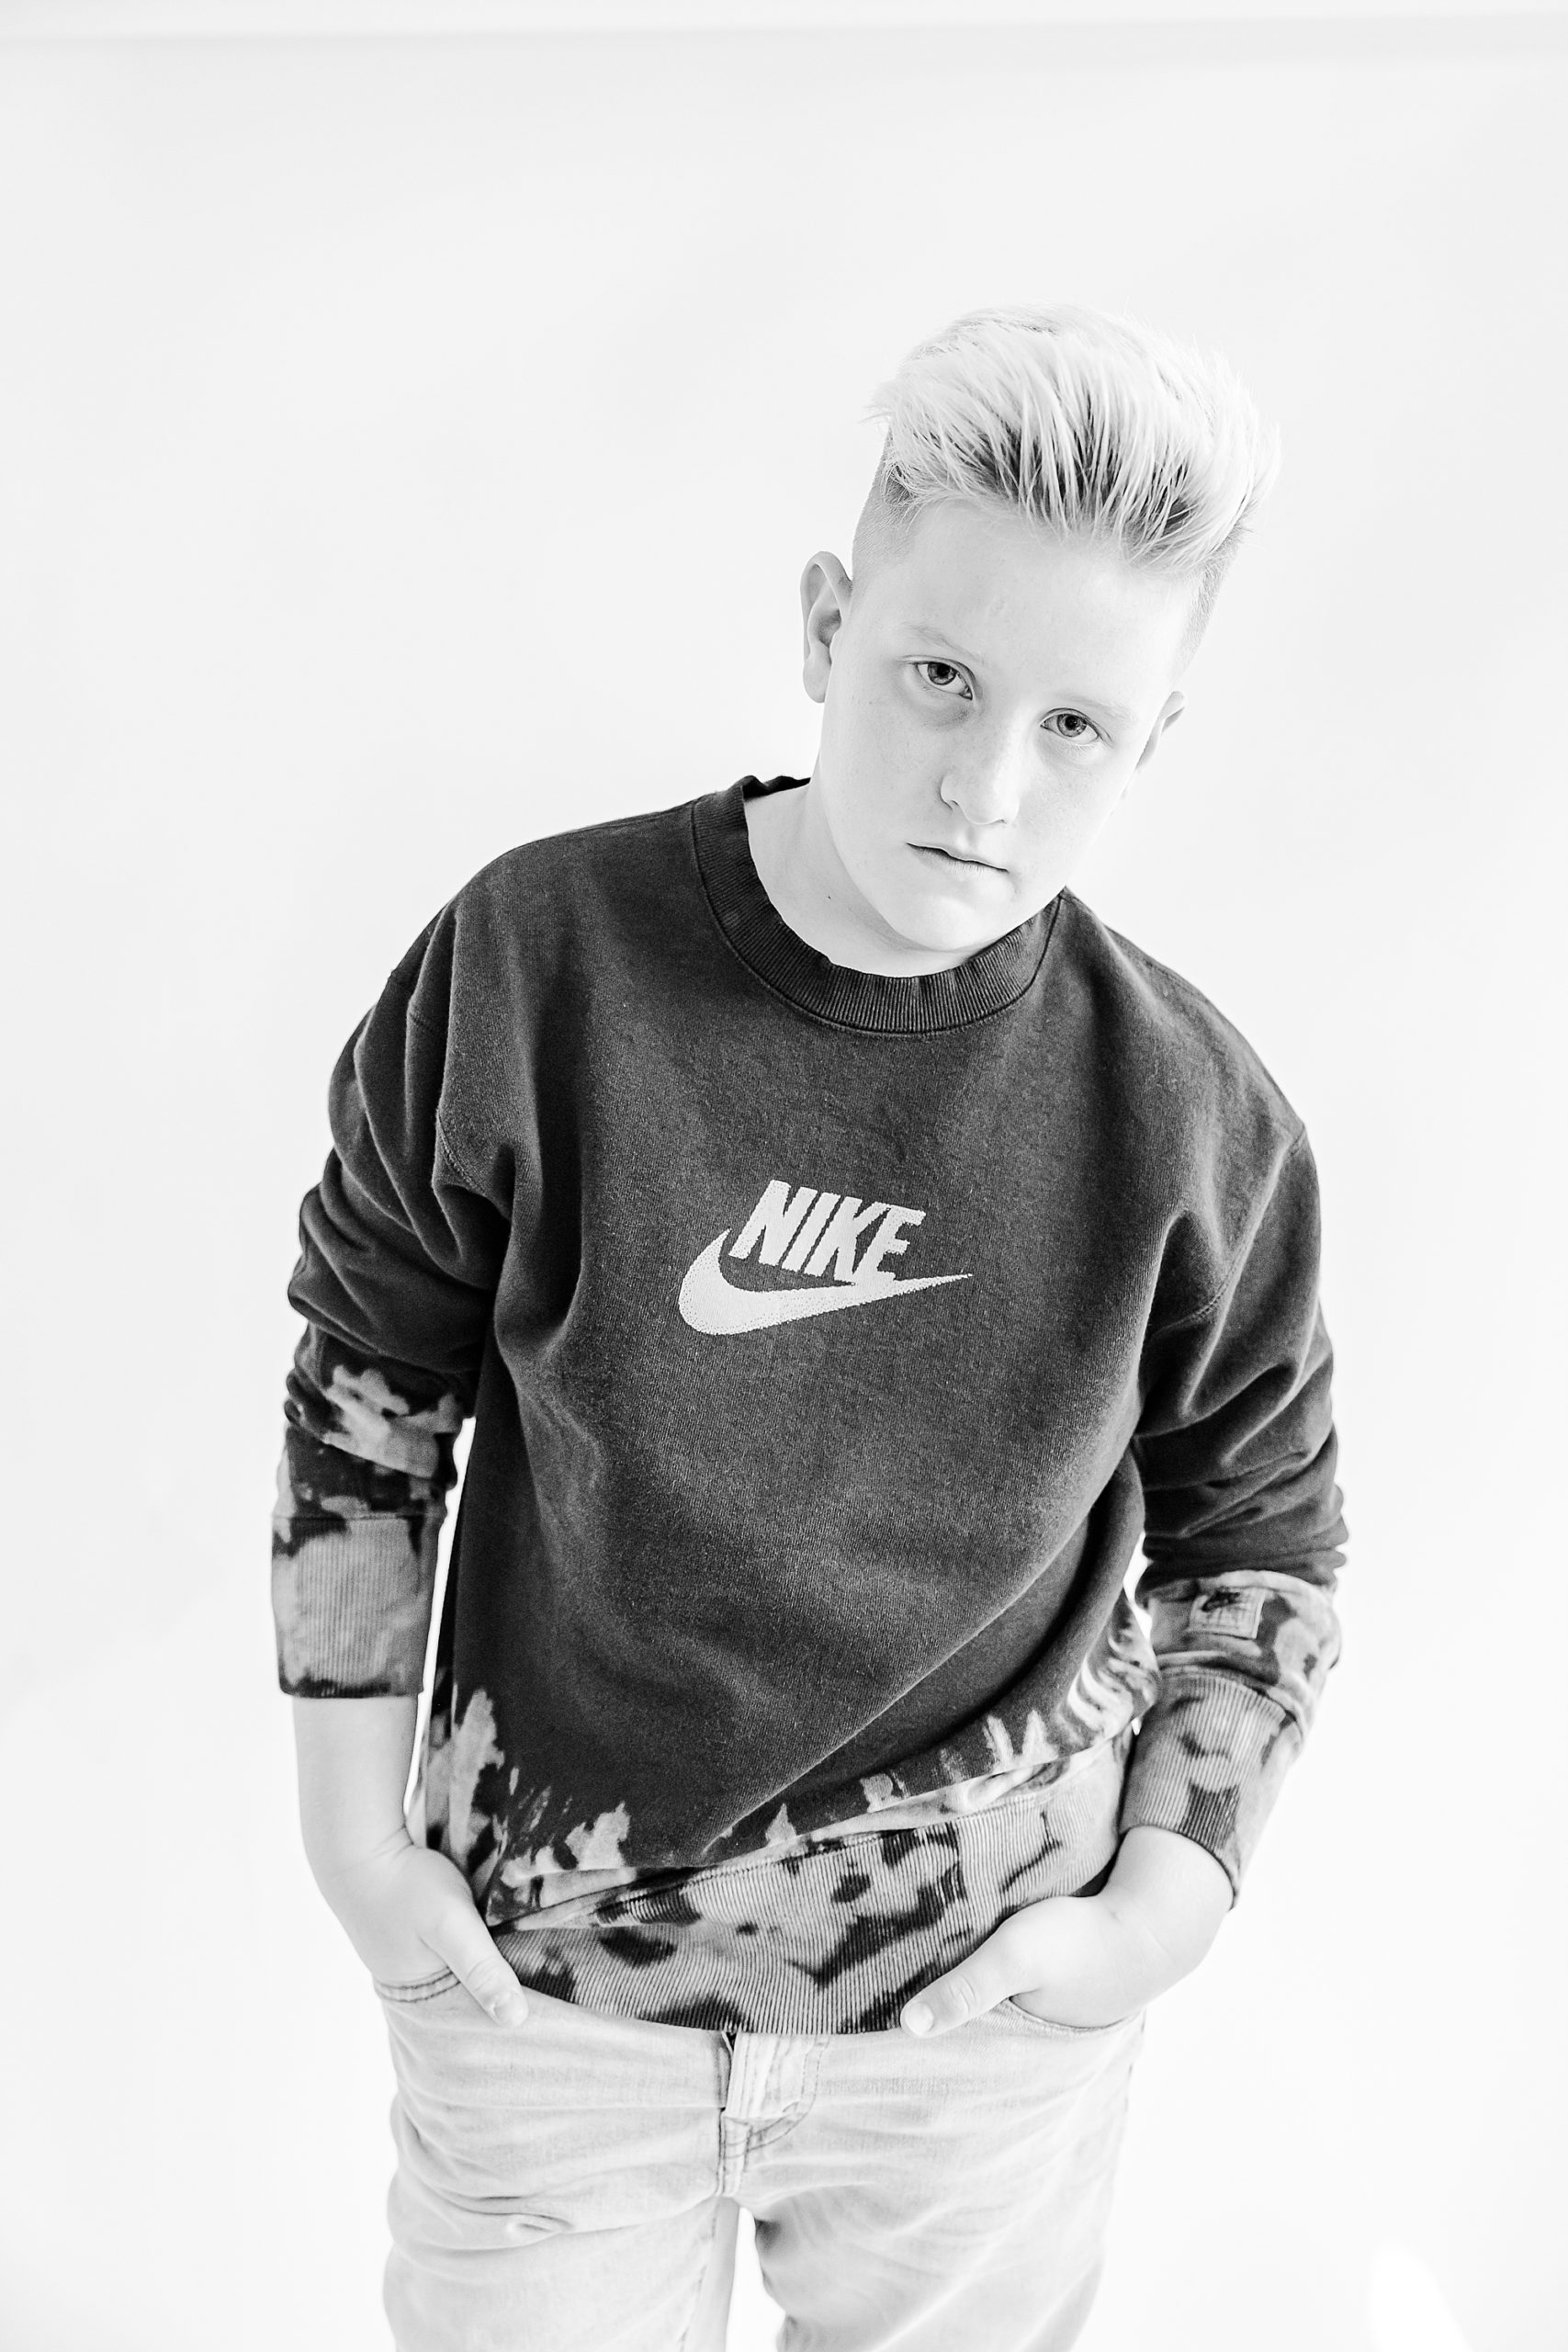 teenager stands with hands in pocket wearing NIKE shirt during studio personality portraits